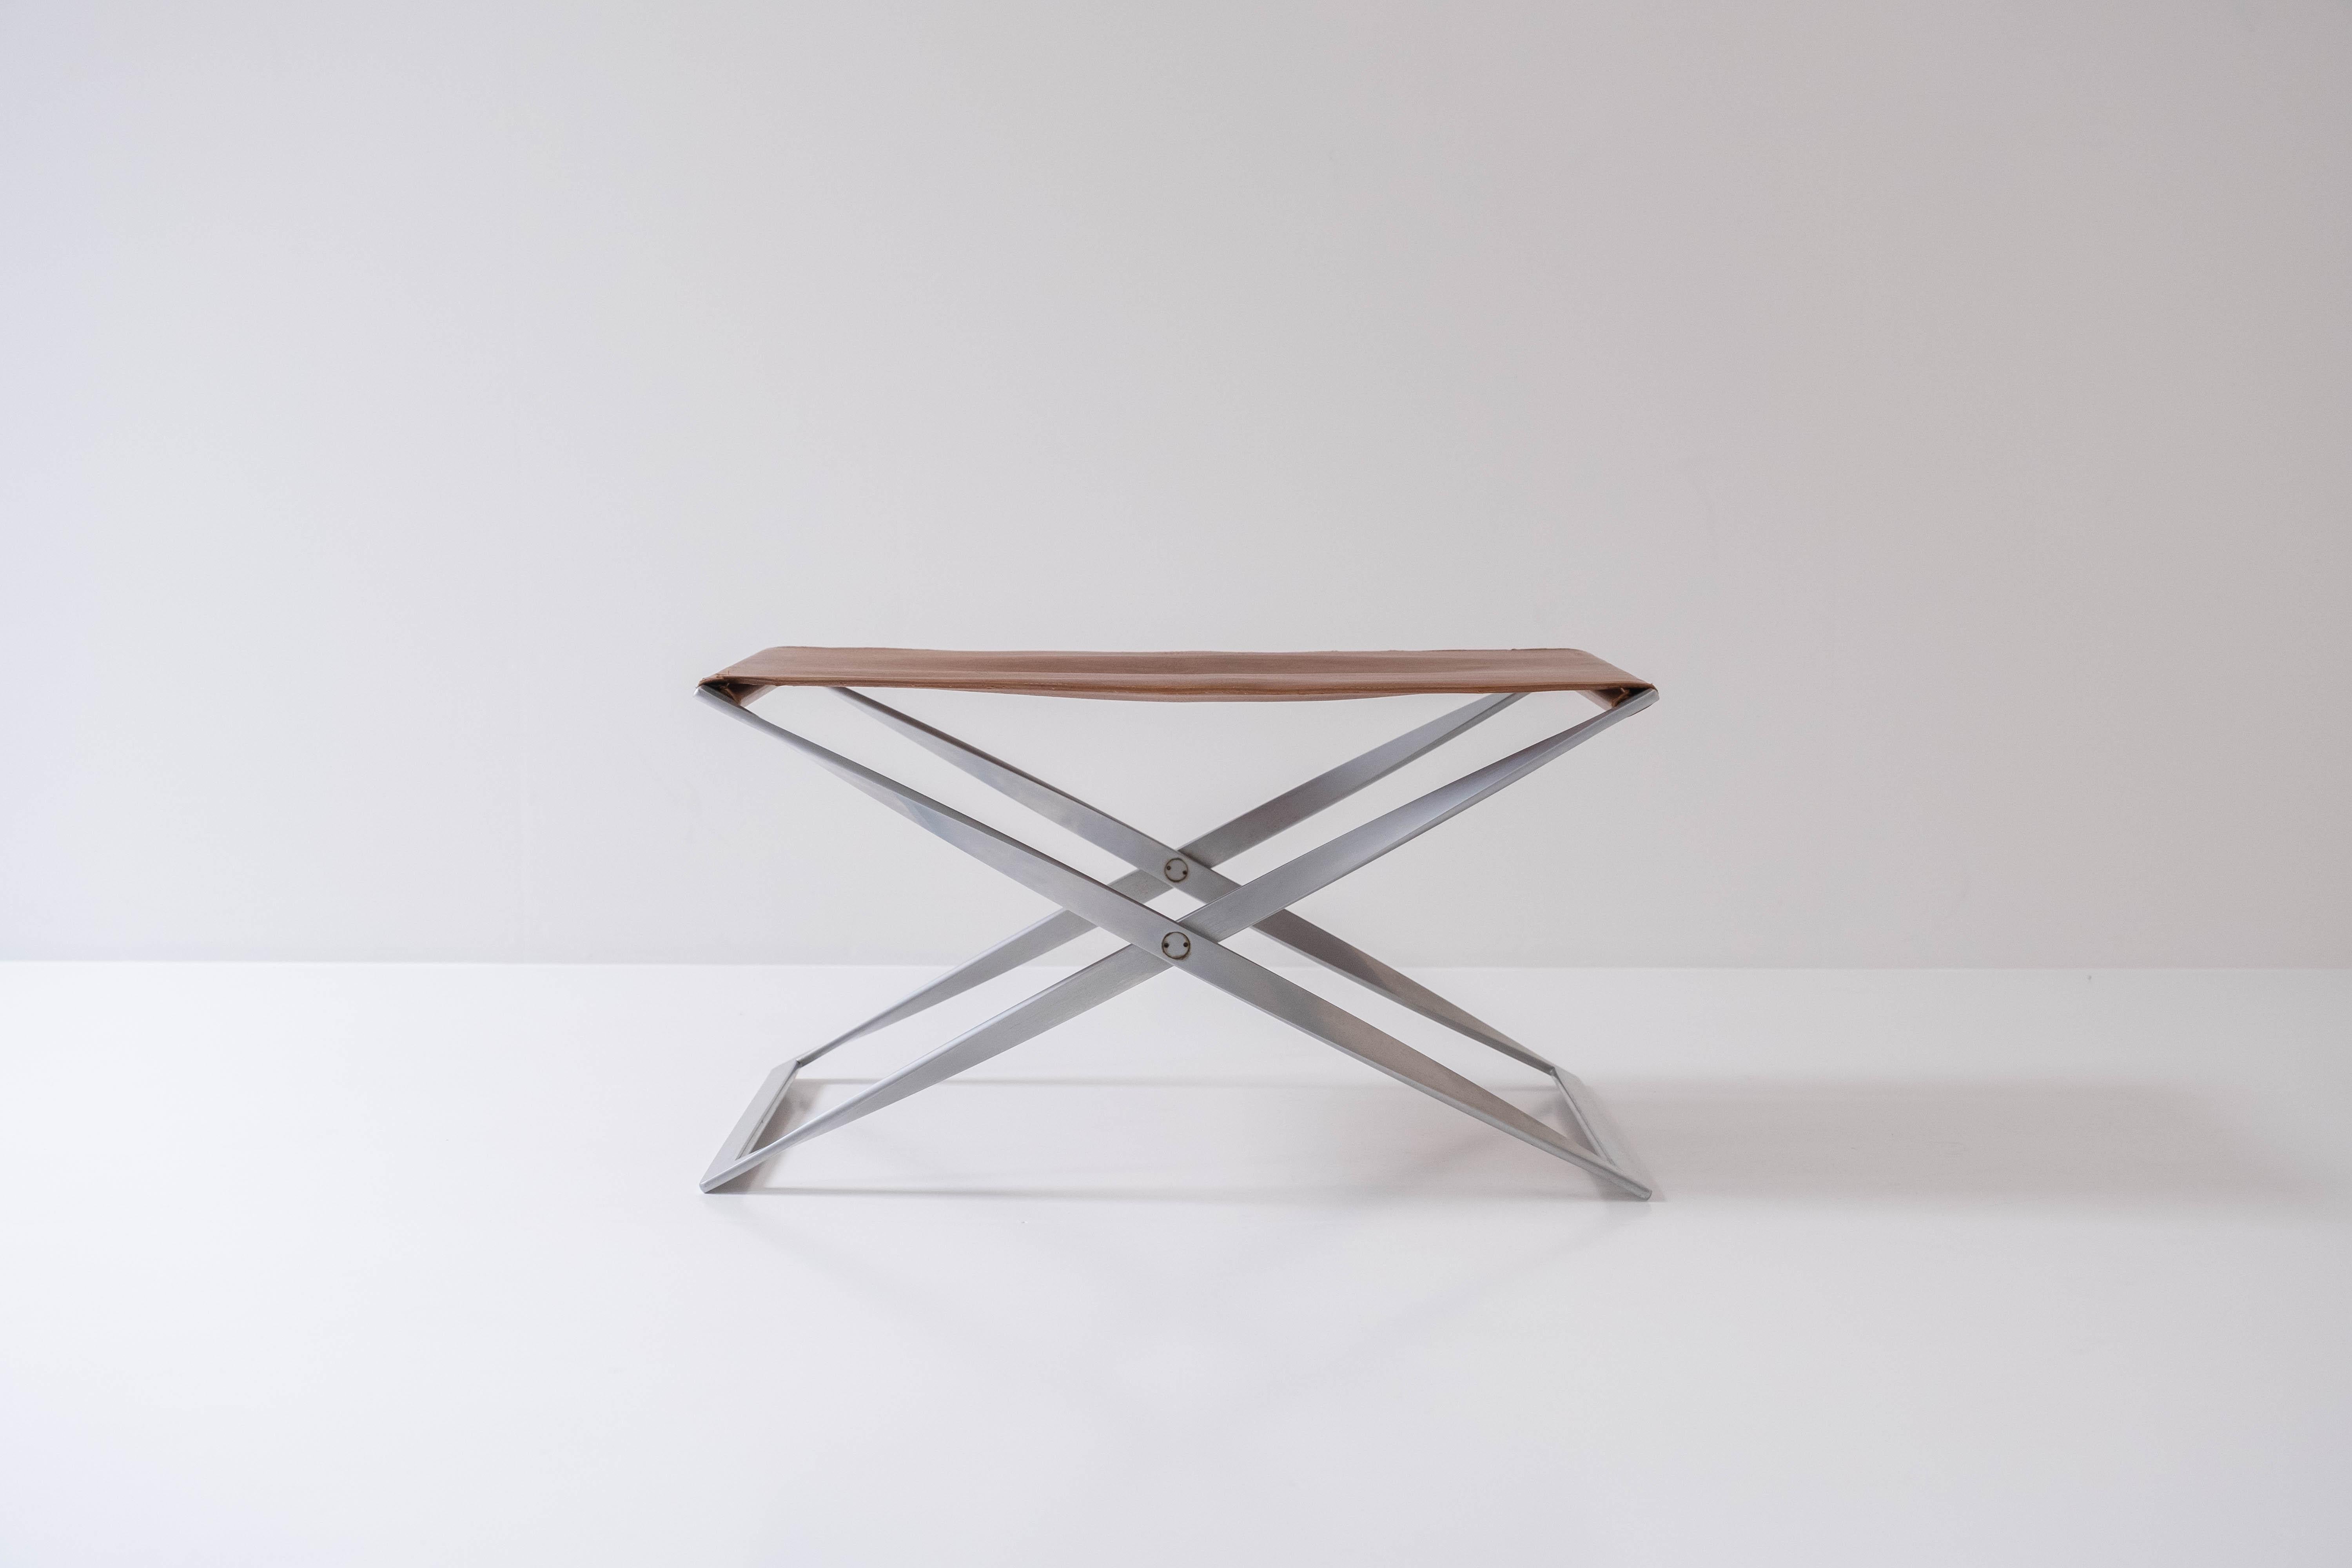 Iconic PK 91 folding stool designed by Poul Kjærholm and manufactured by E. Kold Christensen, Denmark 1961. This stool is from an early production and has a matt chromed plated steel frame with its original leather seat. It does not have the EKC